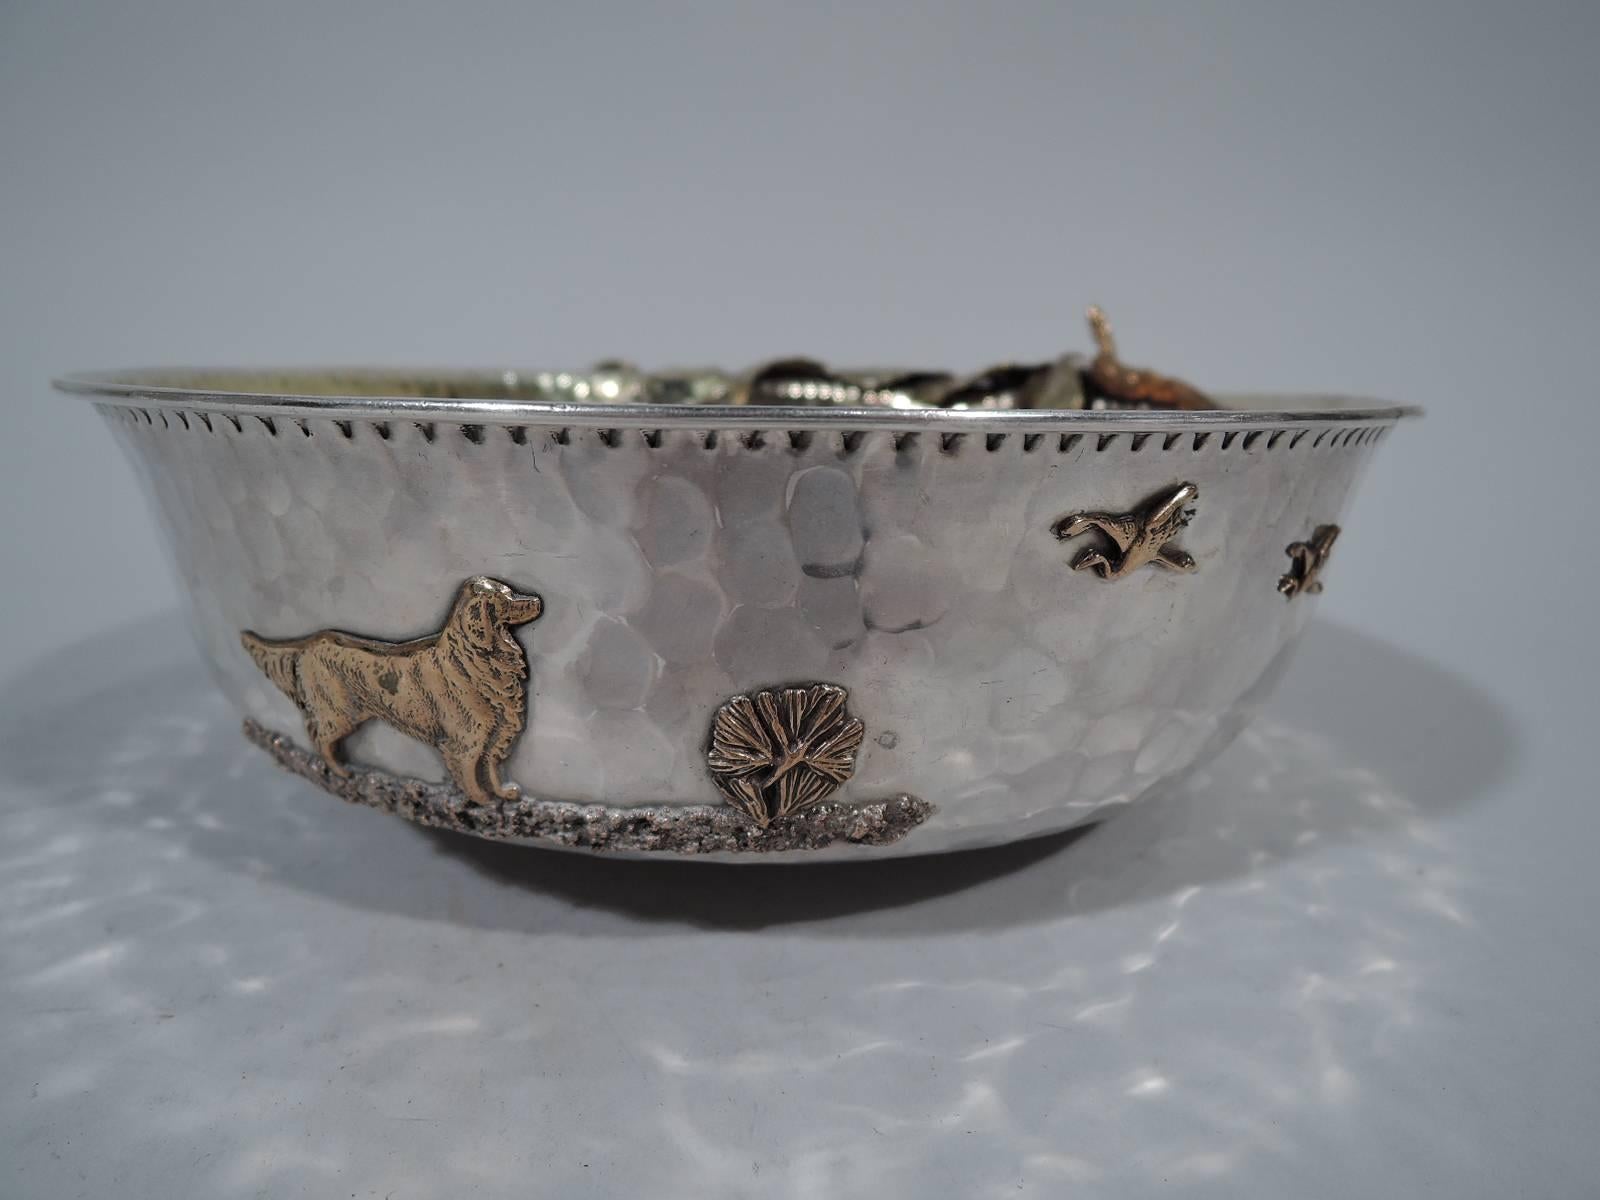 Wonderful sterling silver and mixed metal bowl. Made by Gorham in Providence in 1882. Round with tapering sides and all-over hand hammering visible on interior and exterior. Fruiting branch with overhanging cherries applied to one side. On other a